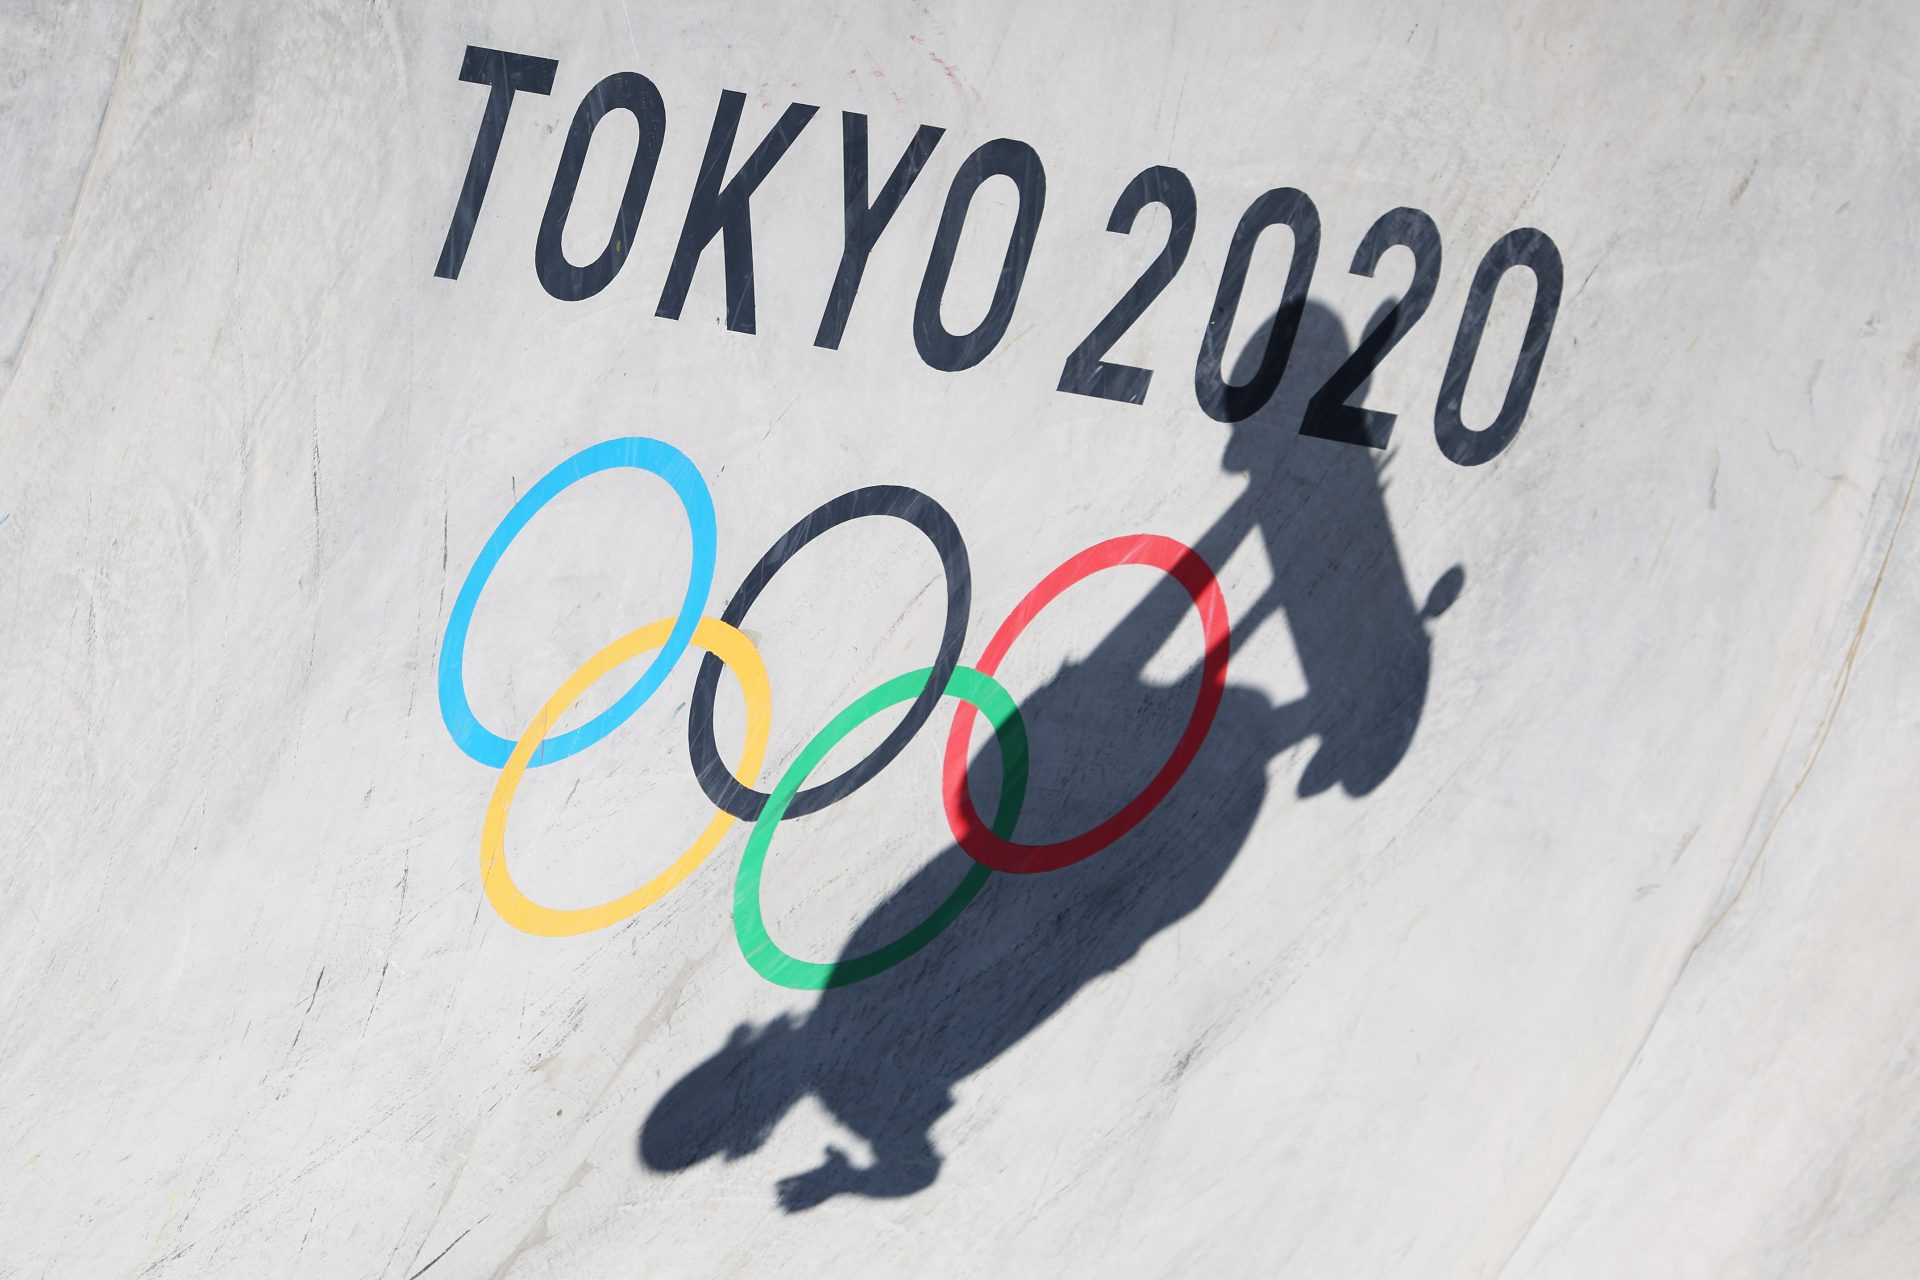 How many world records were broken at the 2020 Games in Tokyo?